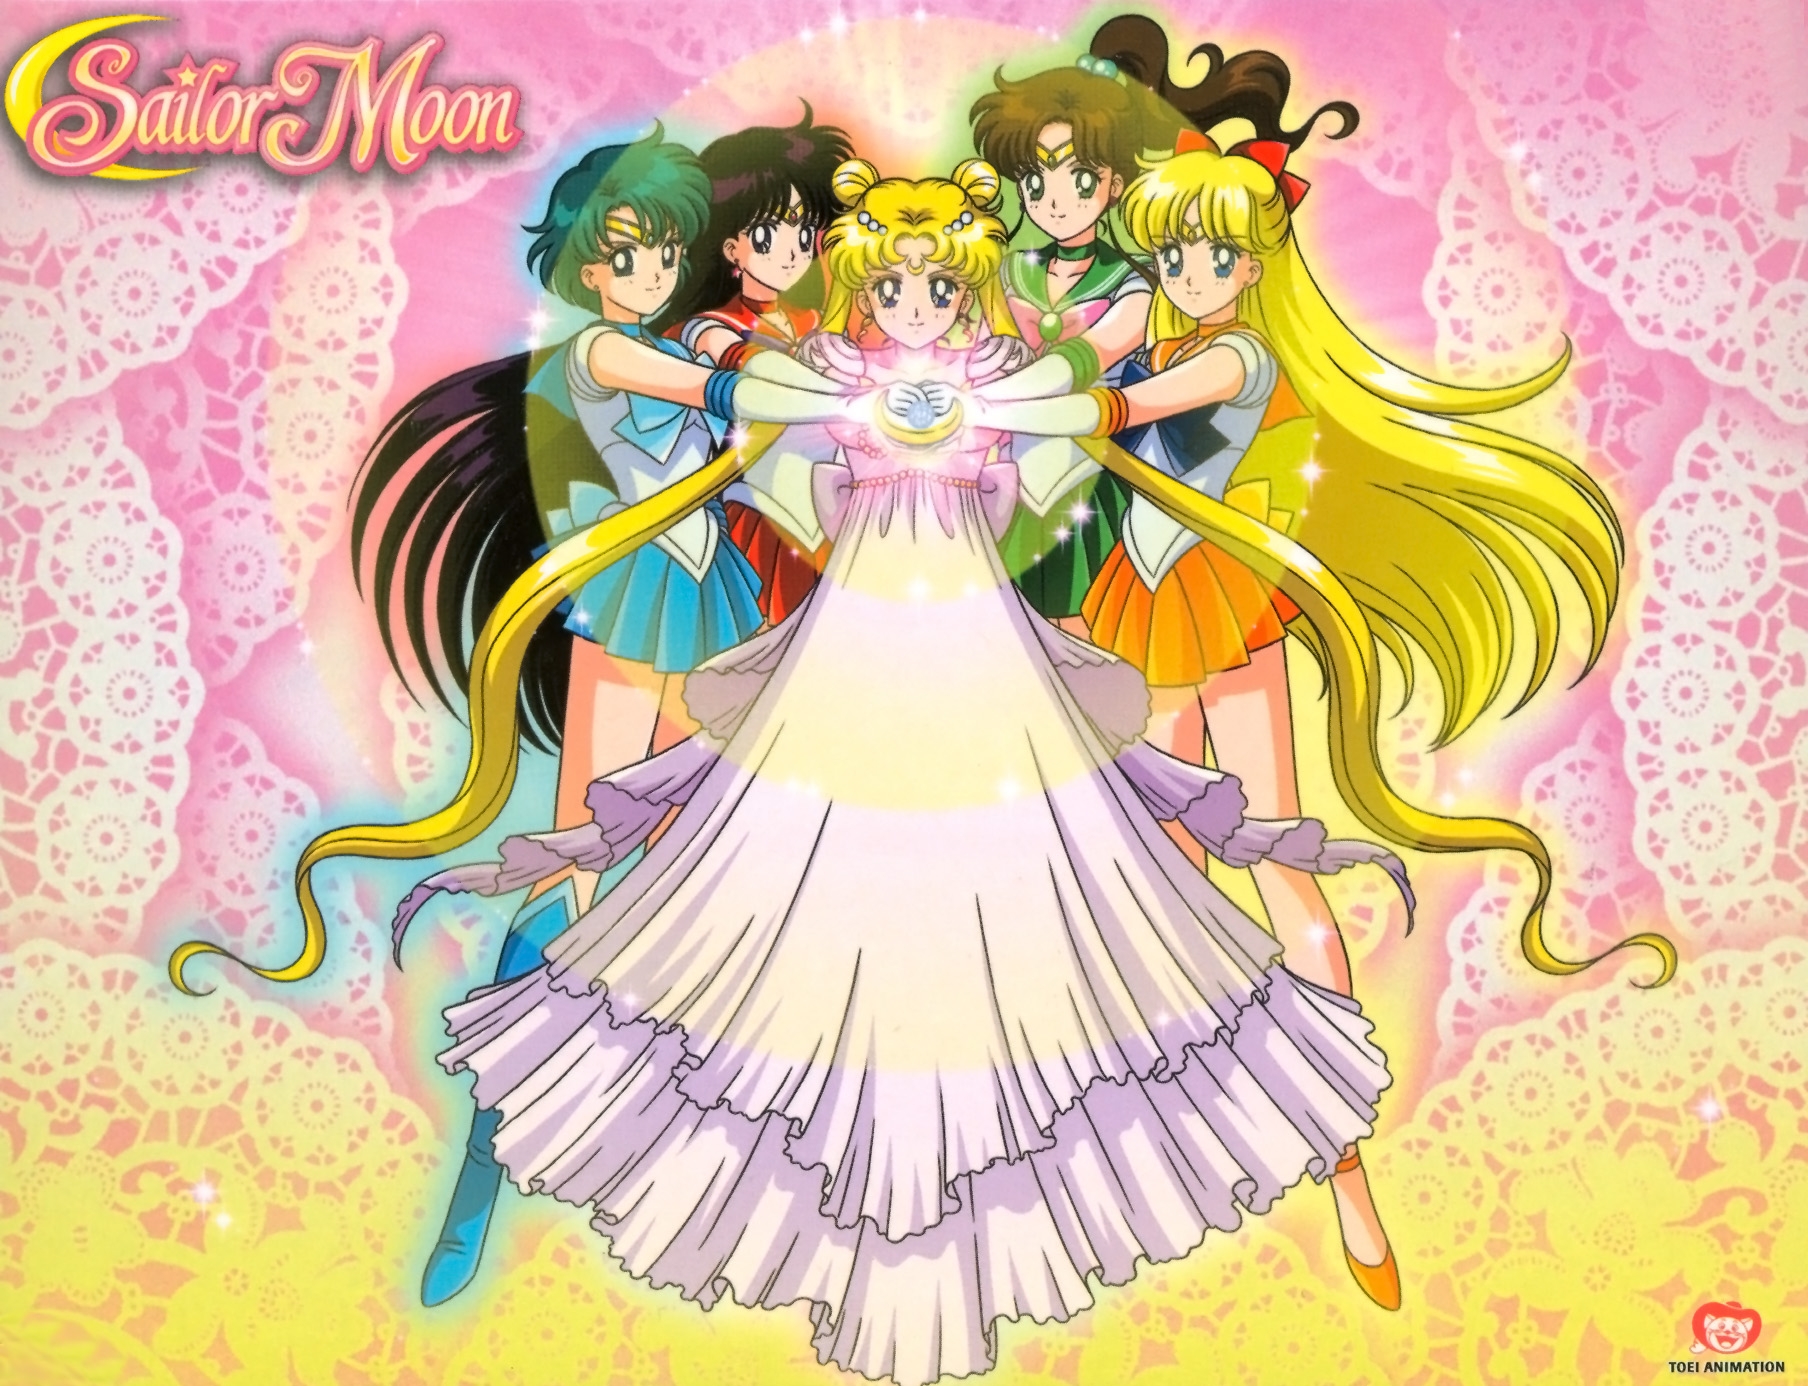 With Friends Sailor Moon Crystal Wallpaper